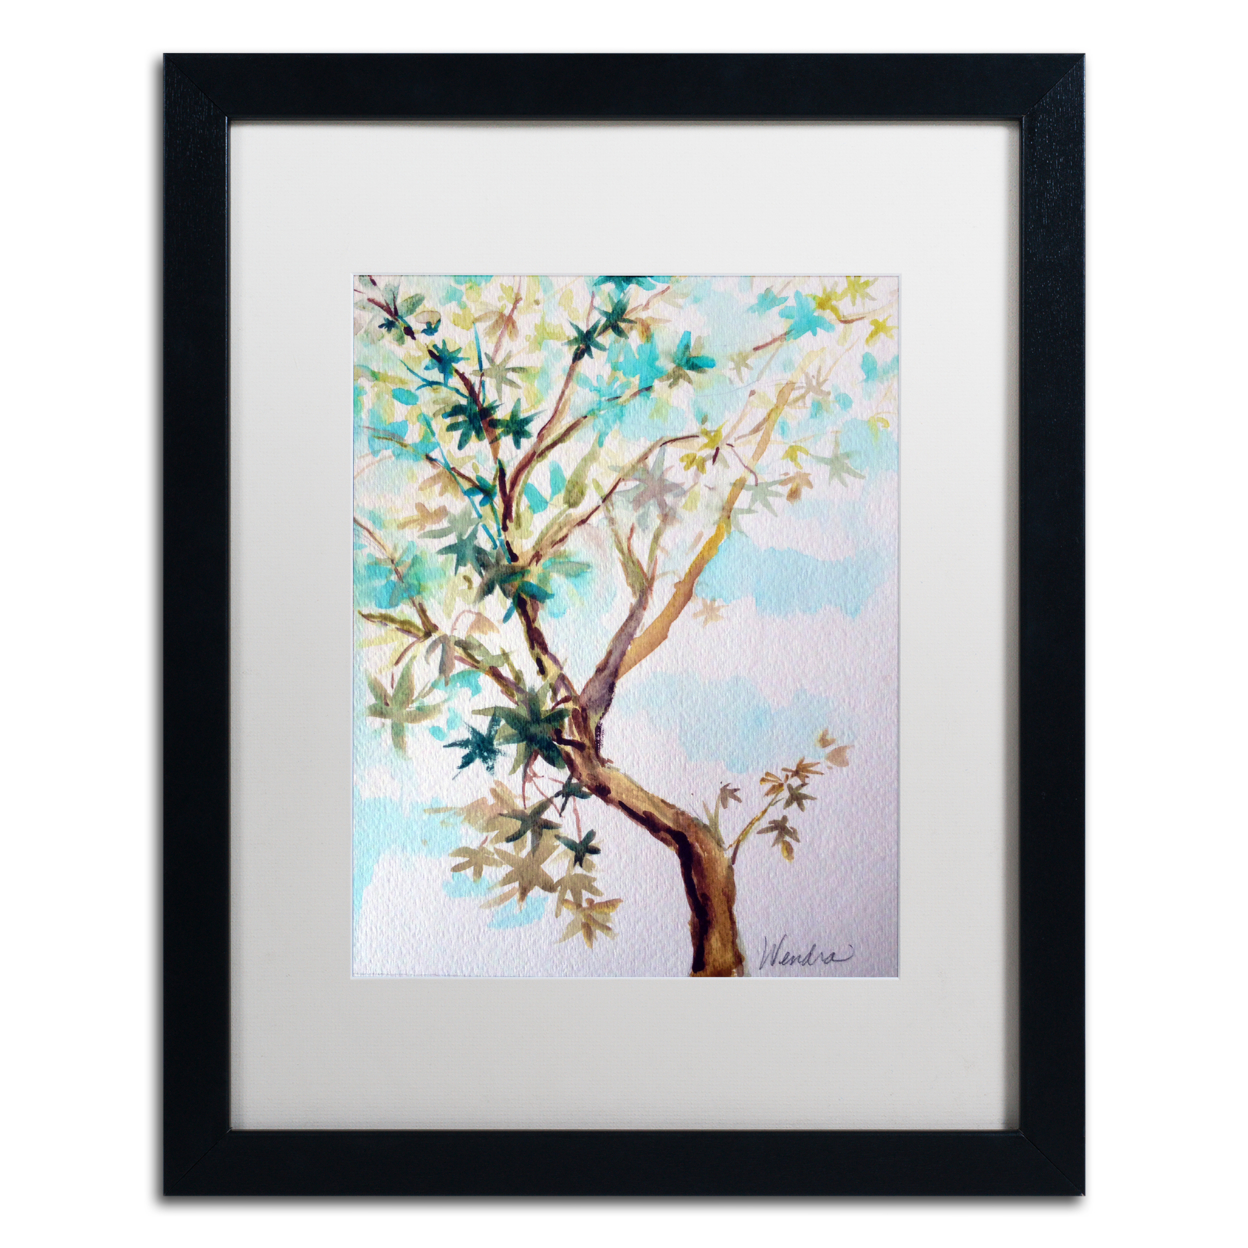 Wendra 'Blue Maple' Black Wooden Framed Art 18 X 22 Inches